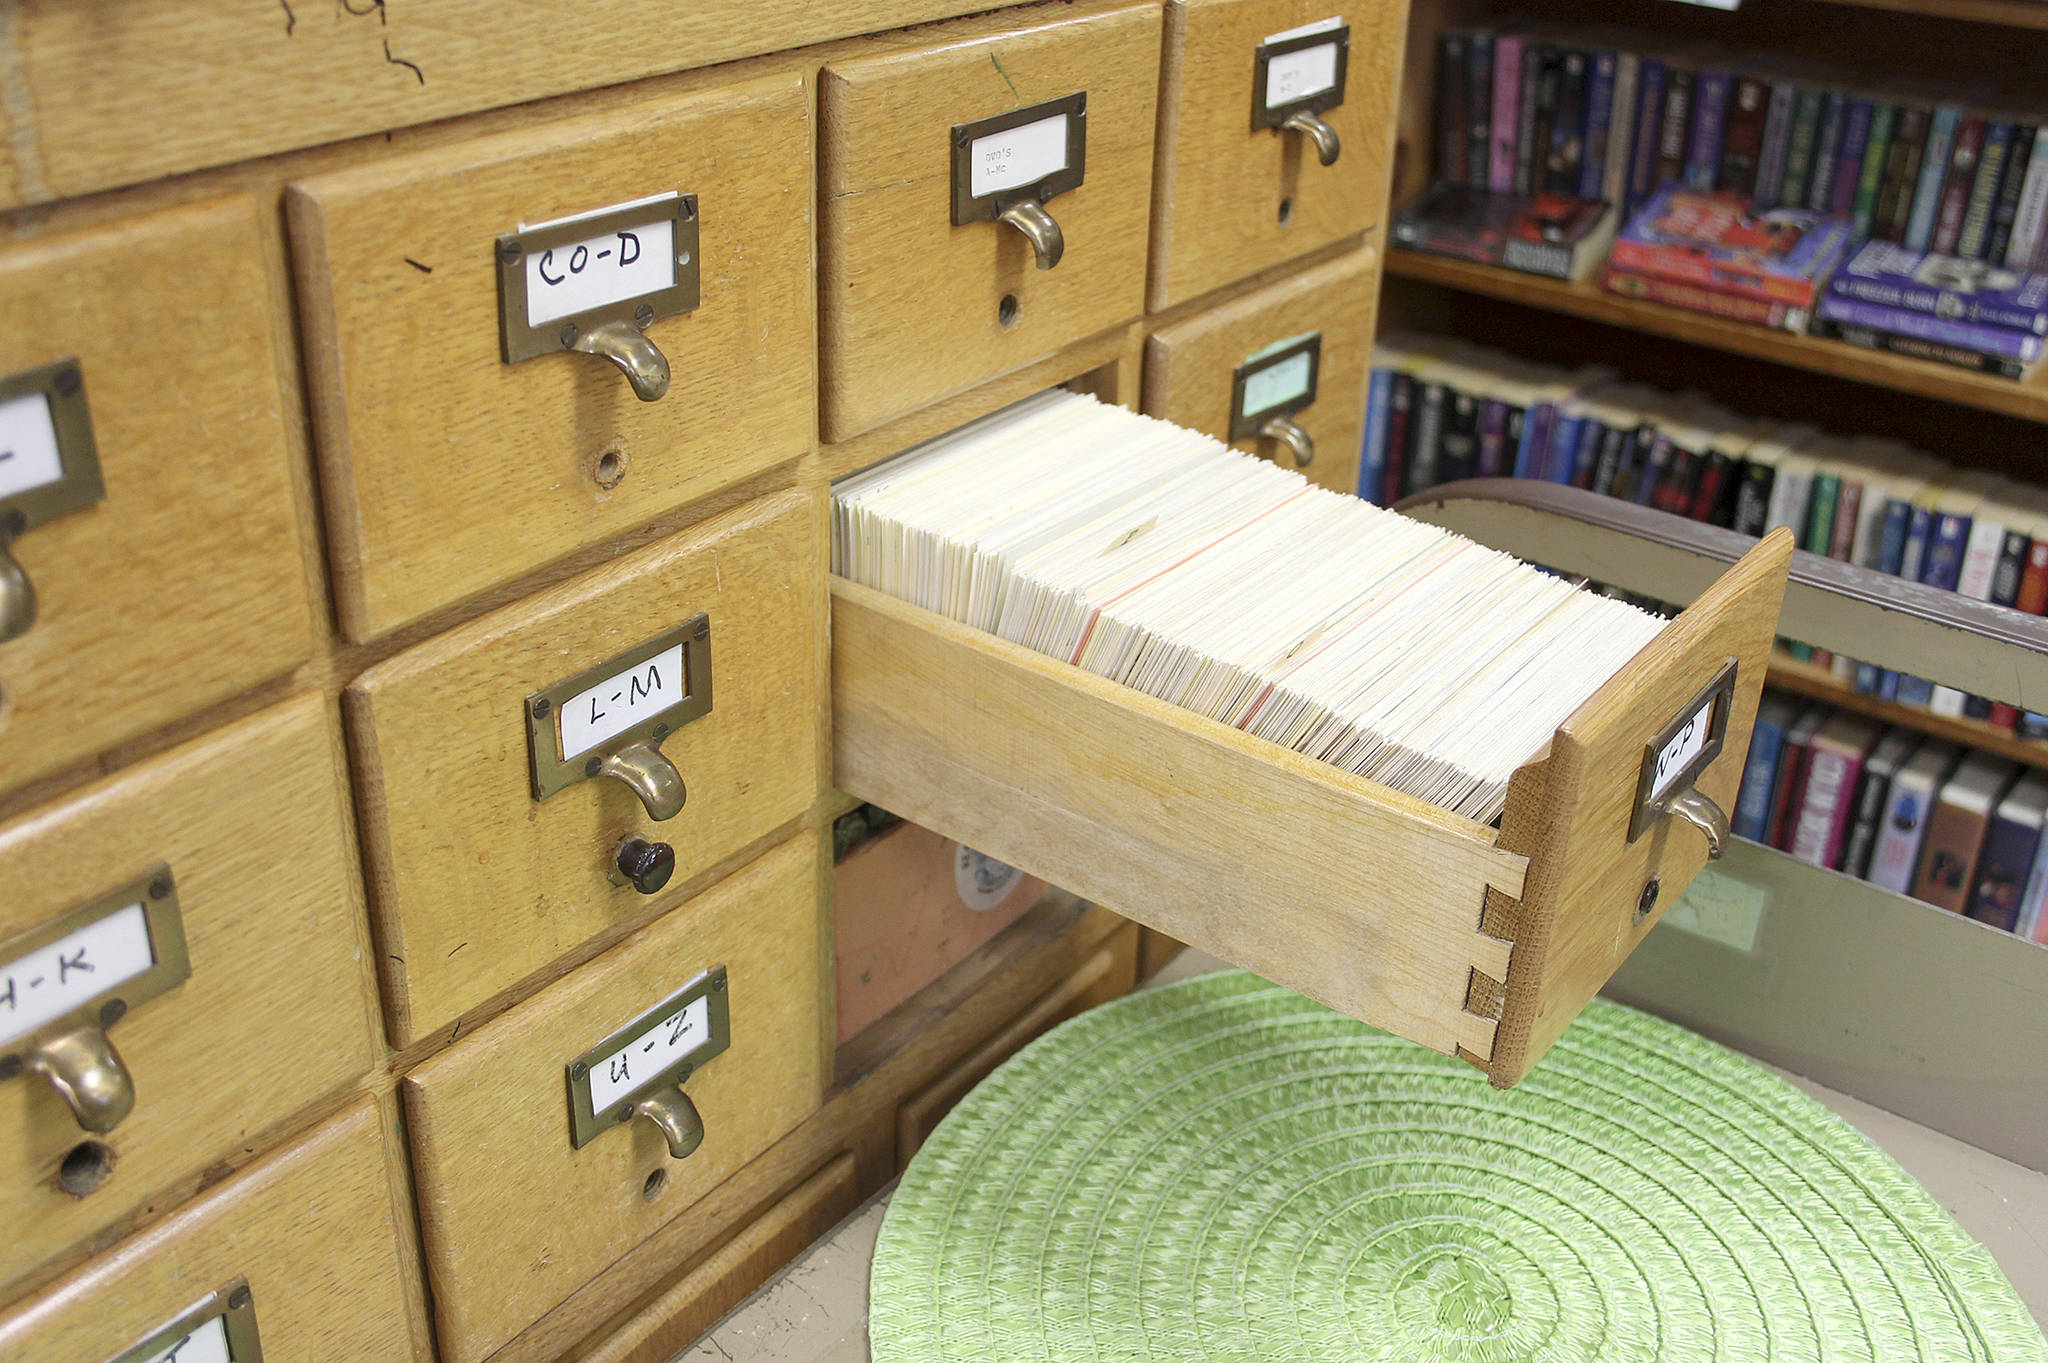 The library uses “old technology” to keep track of its books.